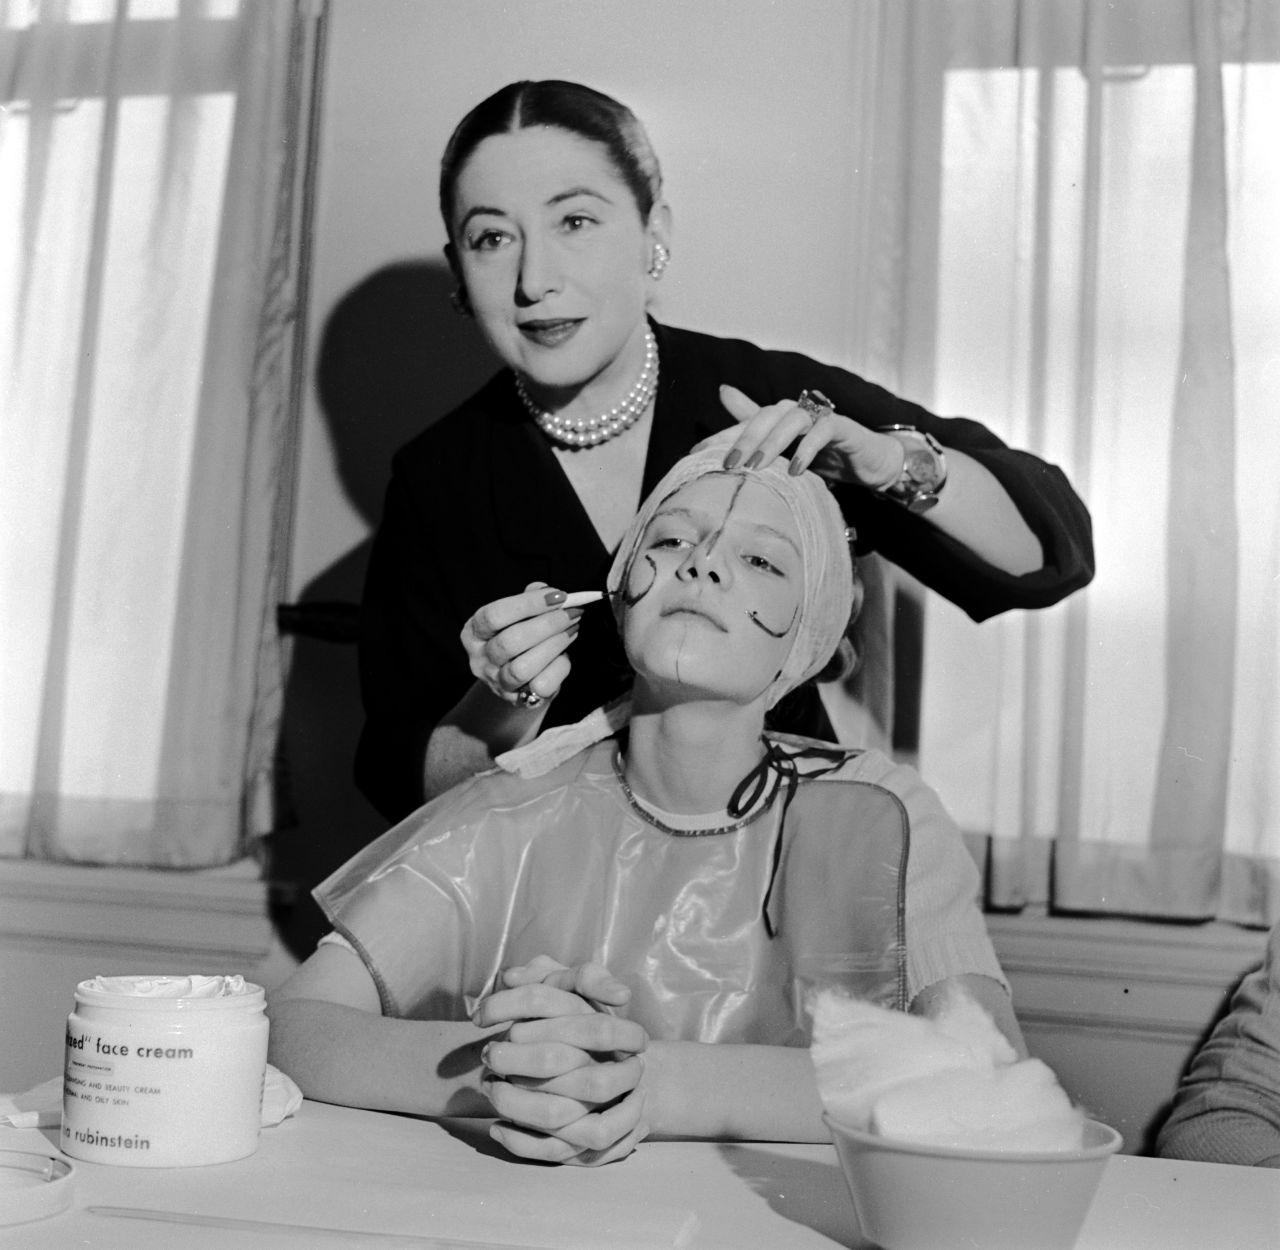 Beauty expert Helena Rubinstein illustrating how make-up can be applied to flatter individual contours (c. 1935)